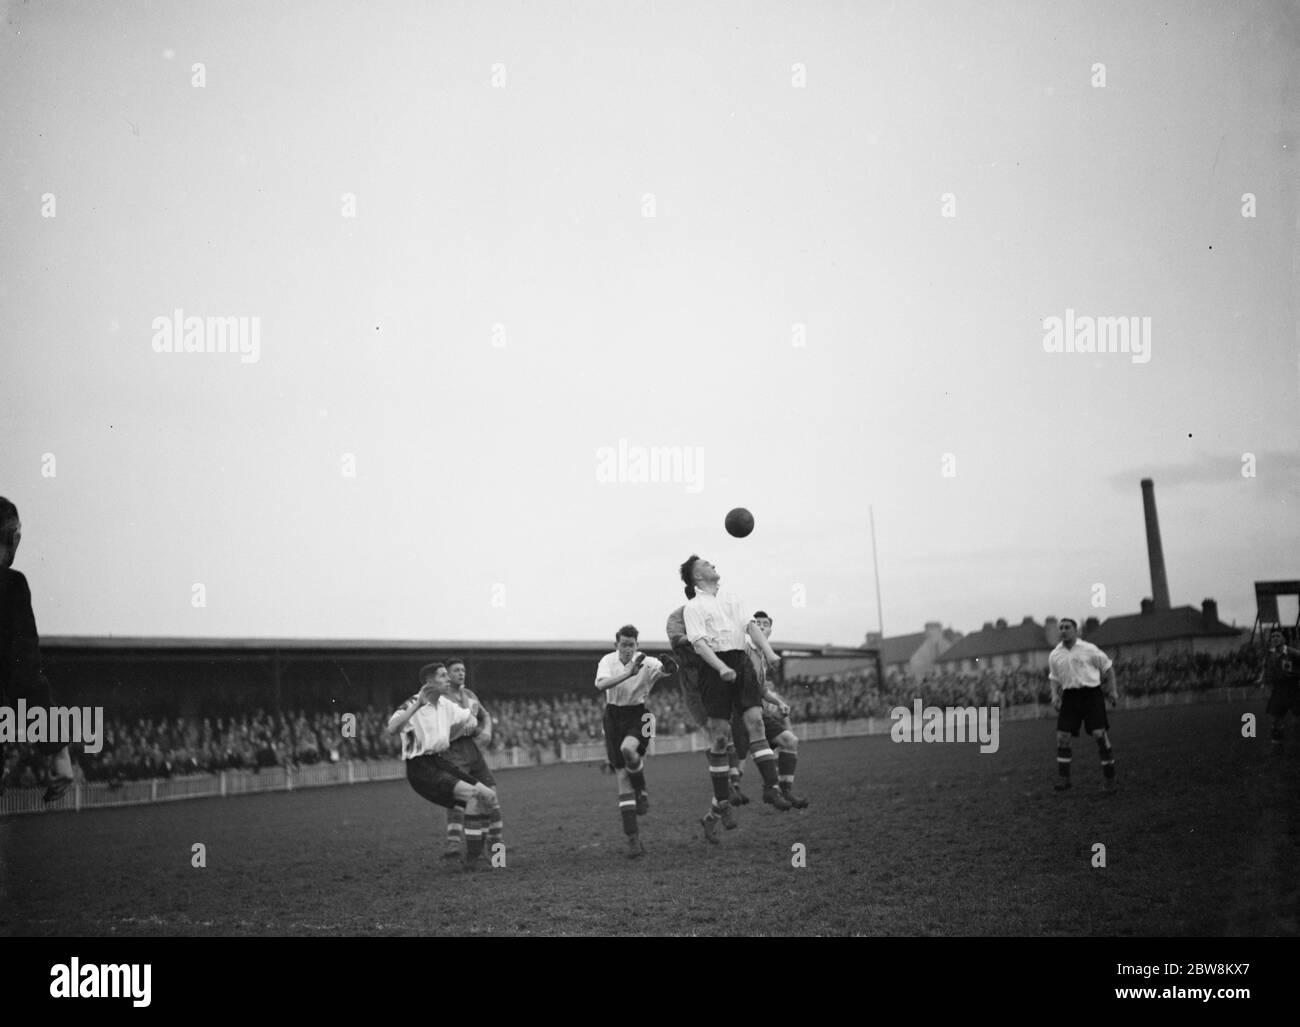 Dartford vs. Bournemouth and Boscombe Athletic - FA Cup 1st Round replay - 01/12/37 . Two players compete for the ball in the air . 1937 Stock Photo